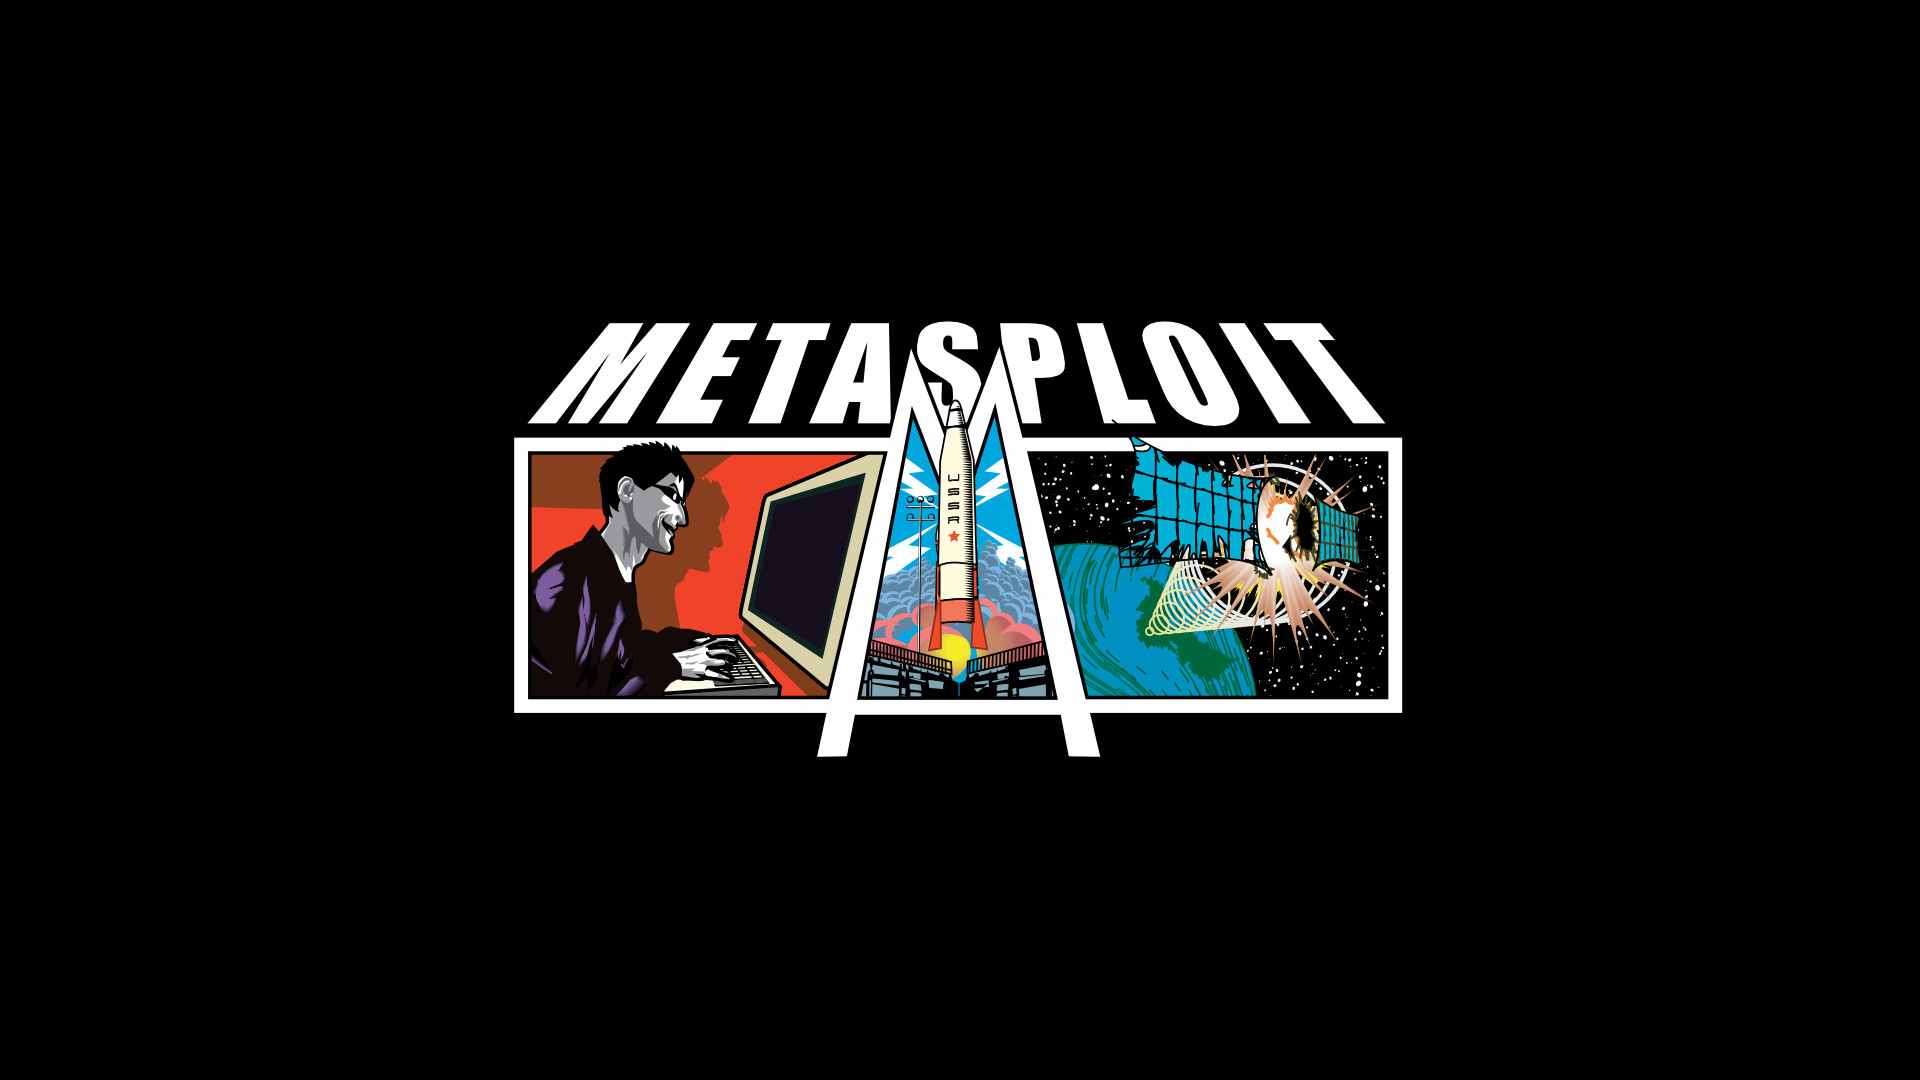 Getting Started with Metasploit for Ethical Hacking